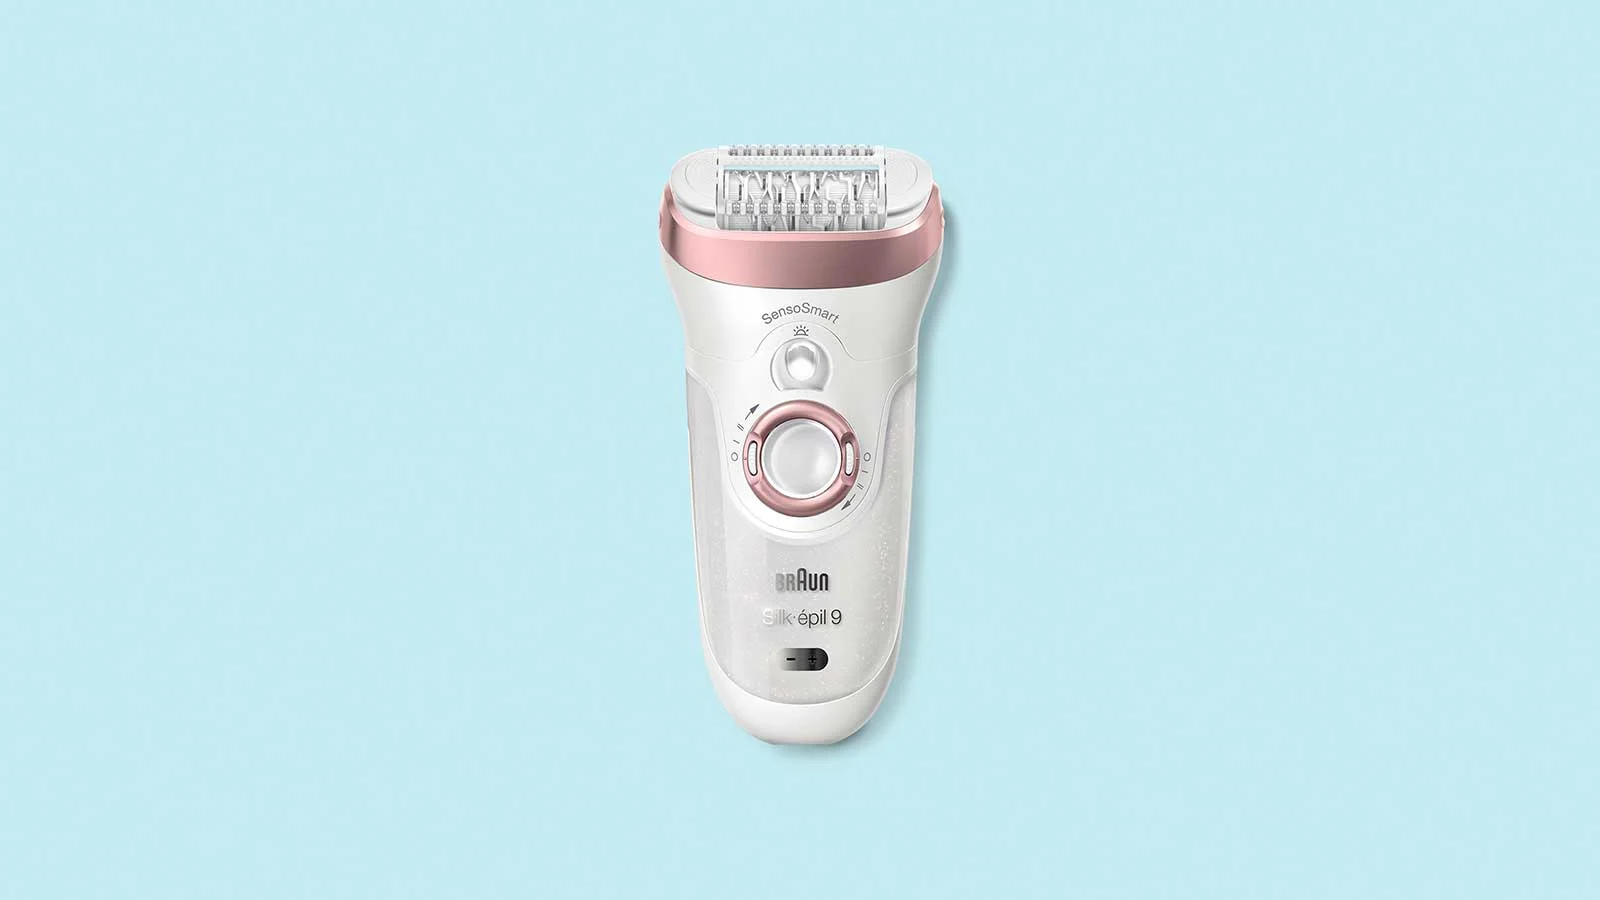 Braun Epilator Can Be Used on All Parts of the Body to Quickly Pull the Hairs Away